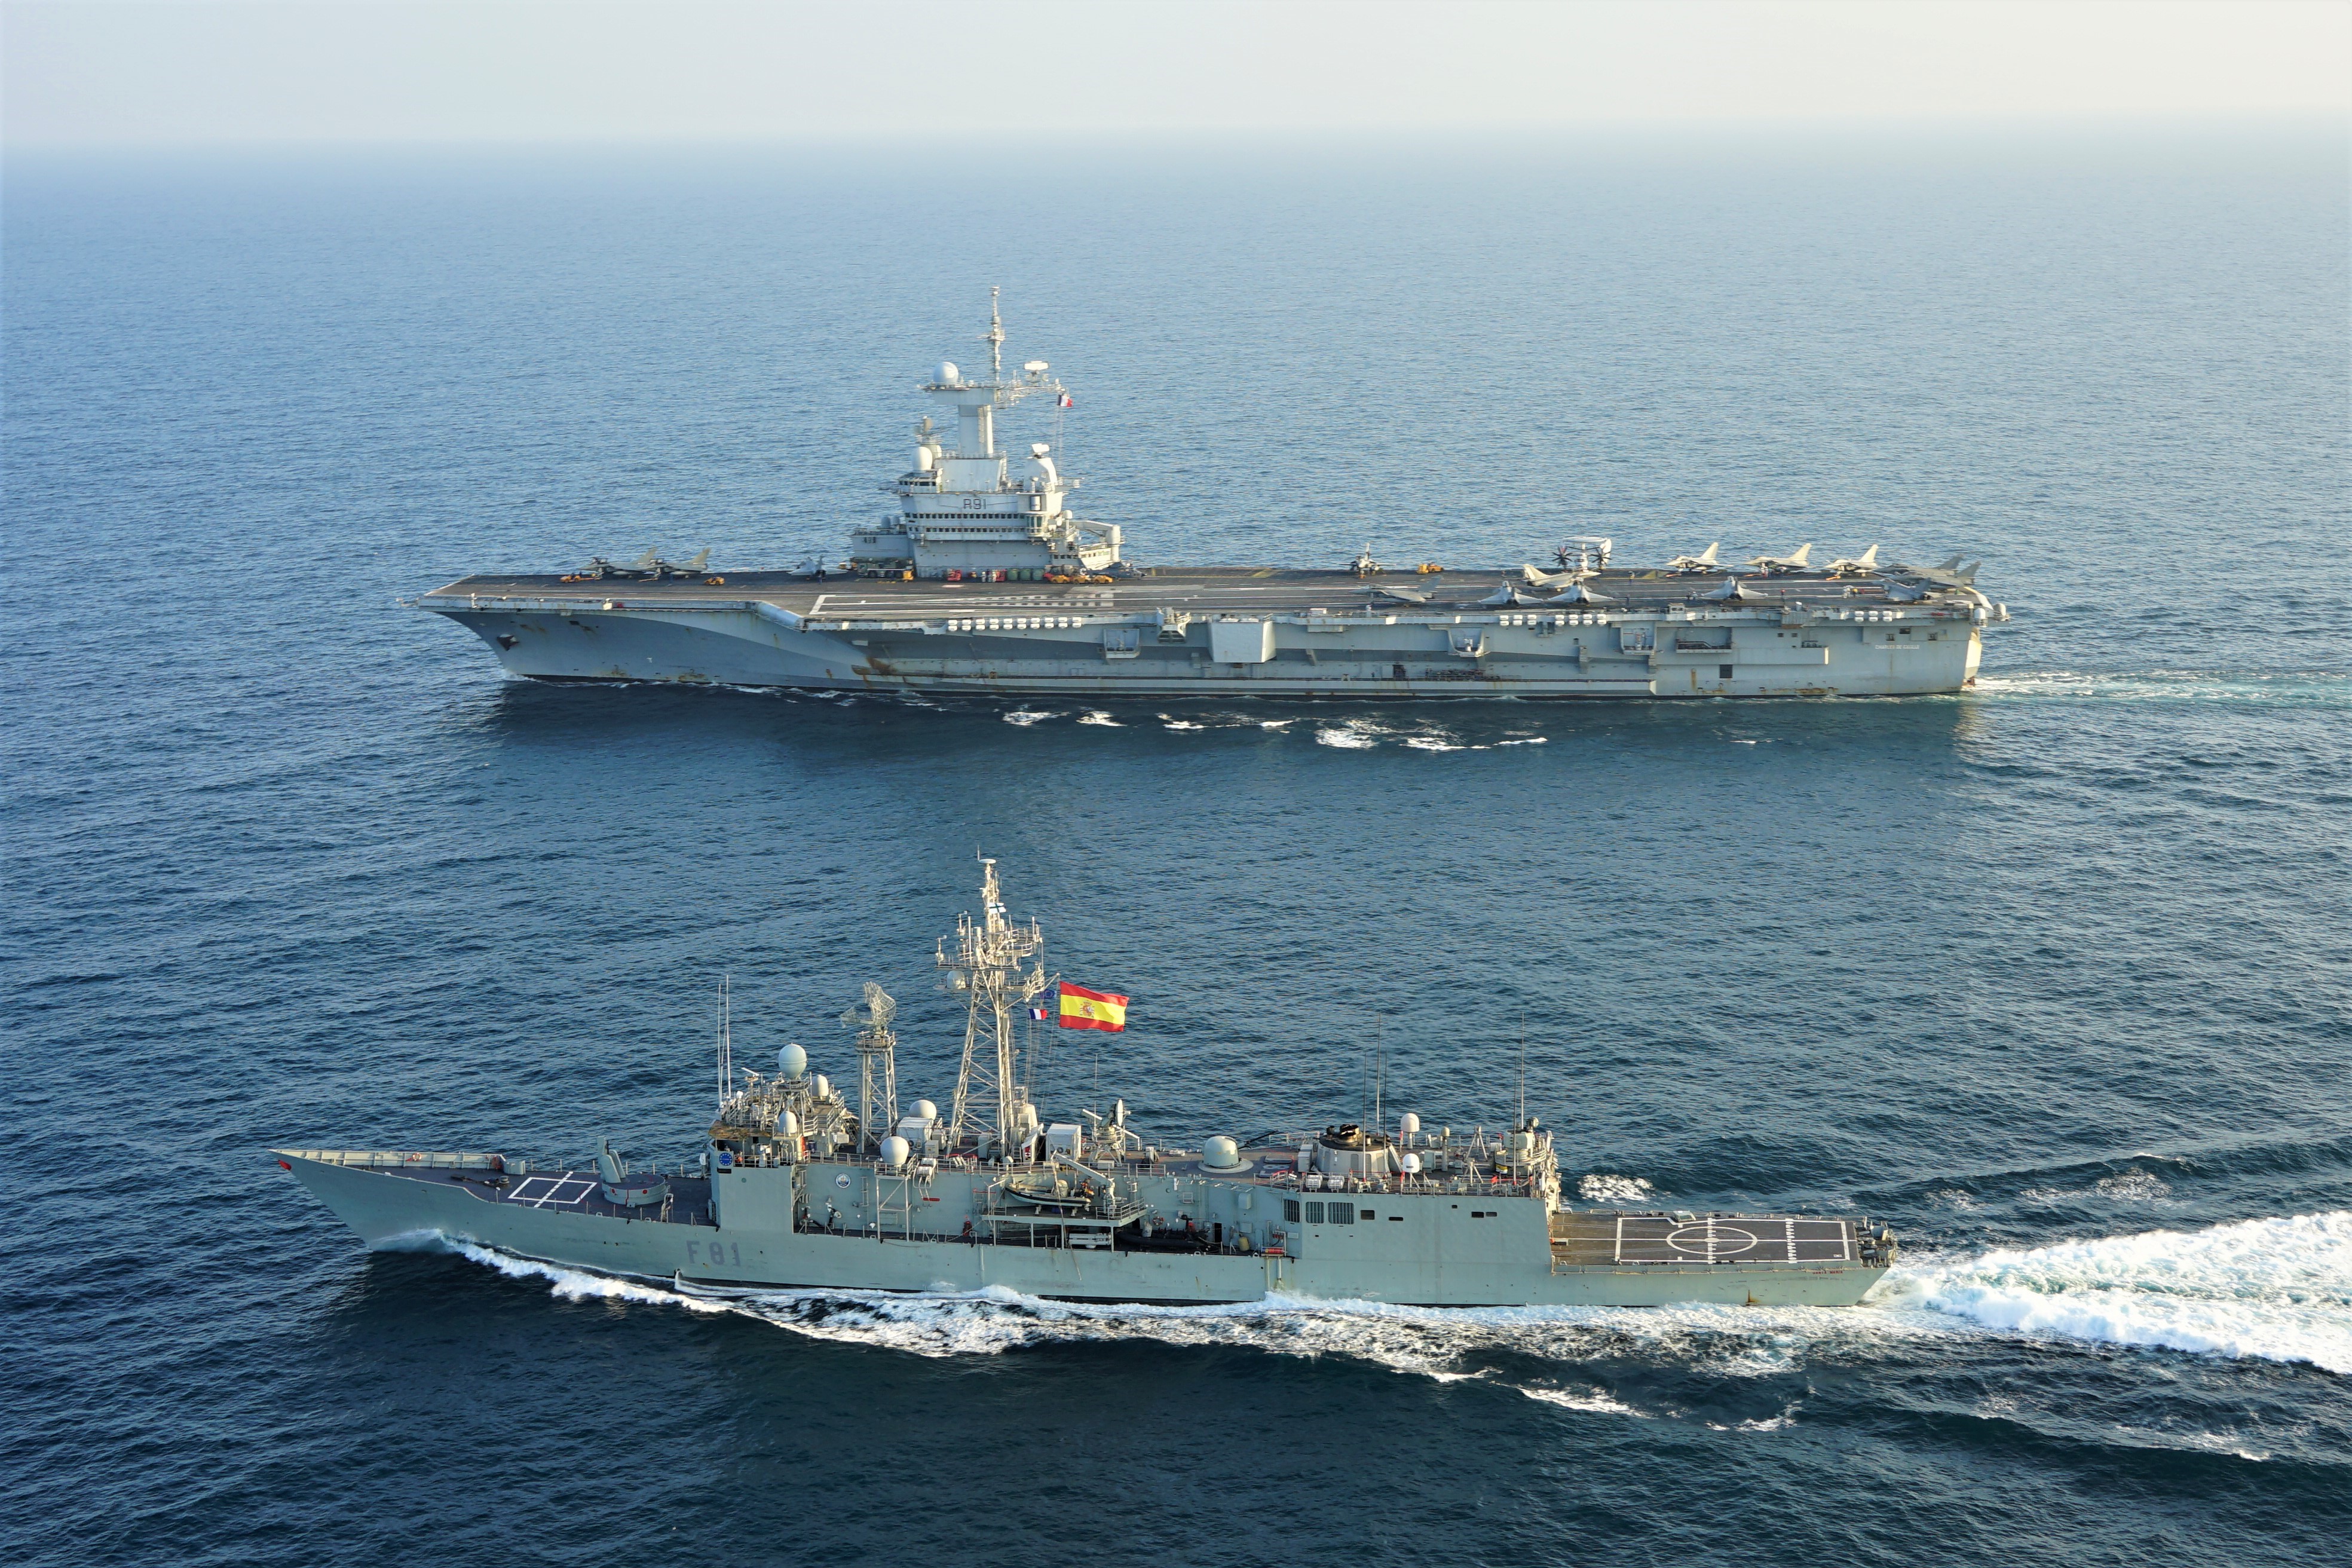 Side-by-side formation between frigate and carrier